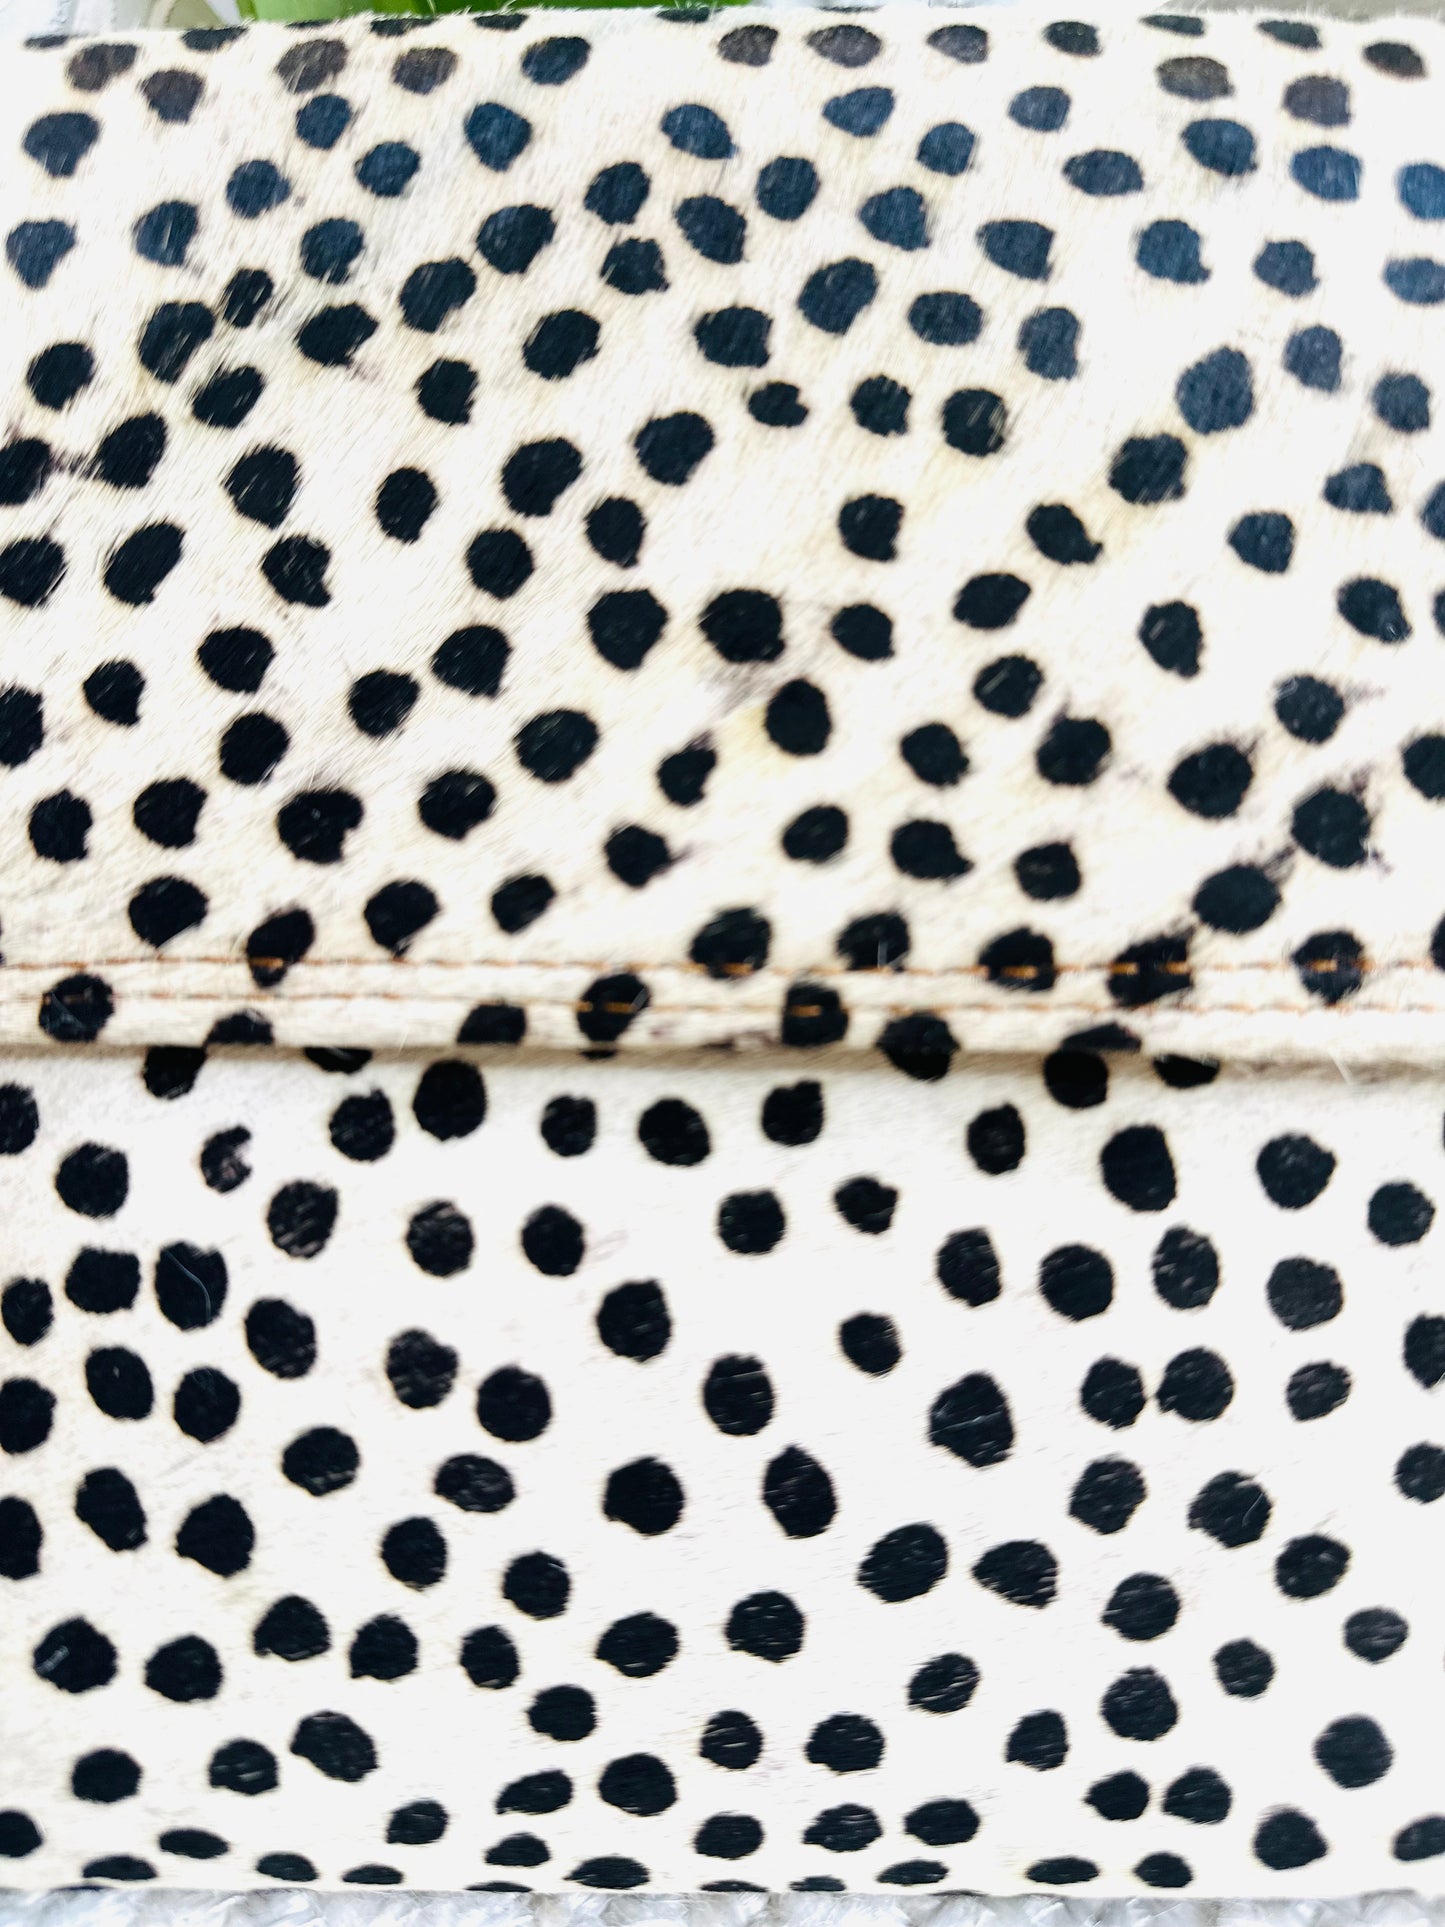 Spotted Large Animal Print Clutch